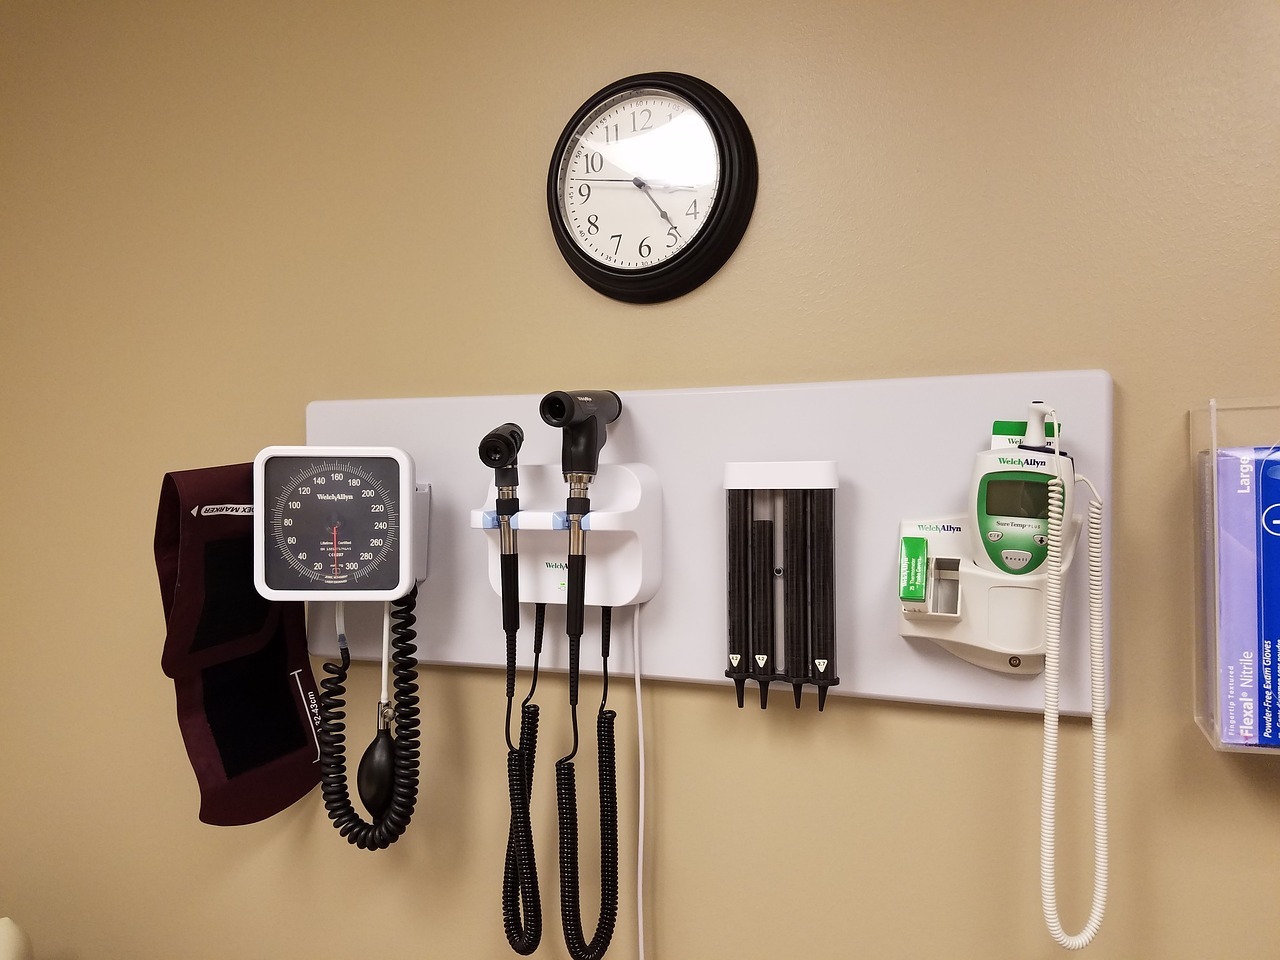 Medical equipment for senior check-ups at a doctor's office